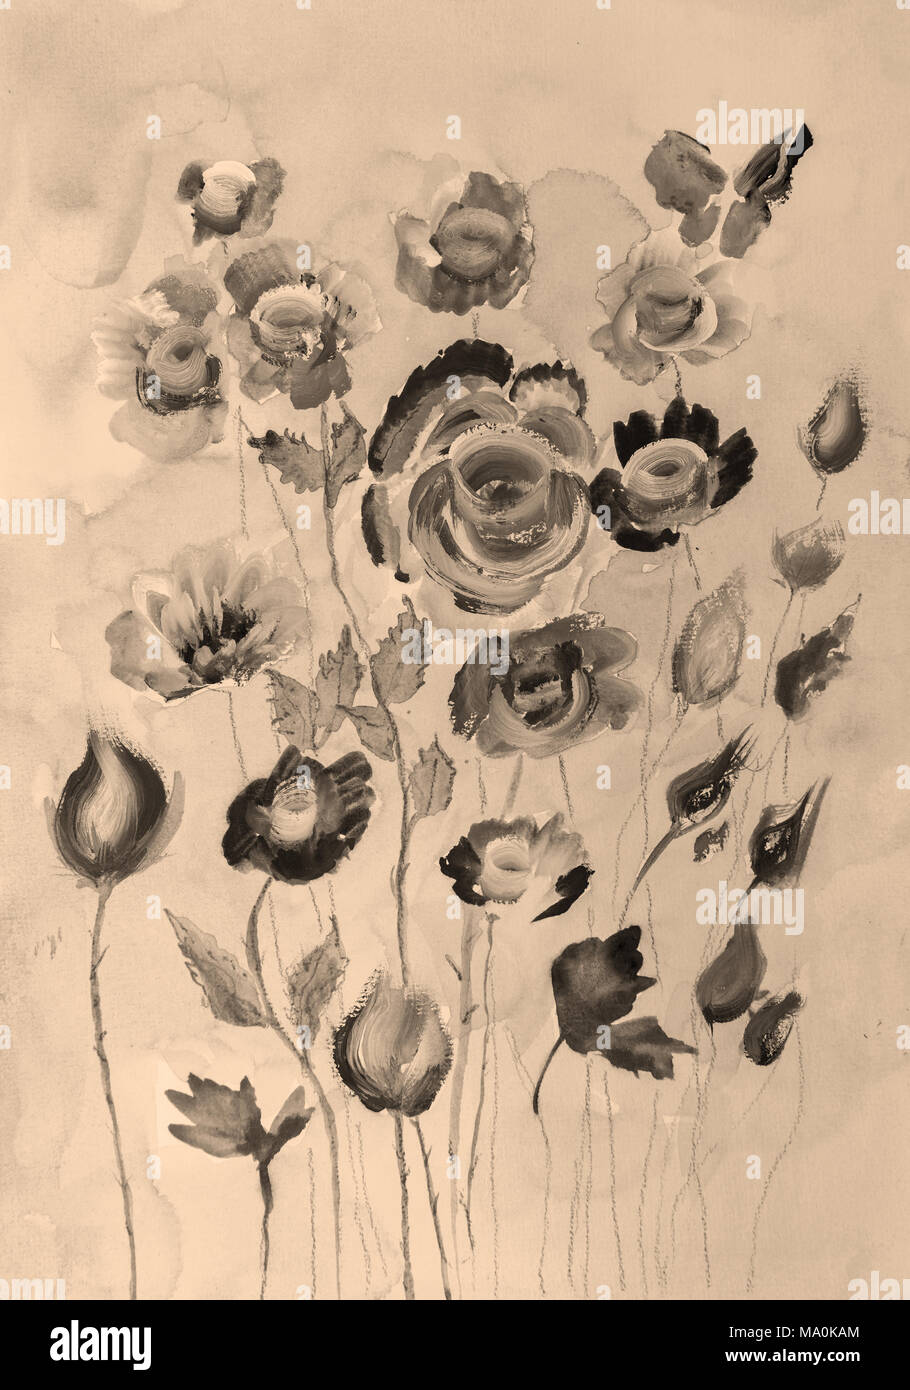 Vintage roses in sepia tones. The dabbing technique near the edges gives a soft focus effect due to the altered surface roughness of the paper. Stock Photo